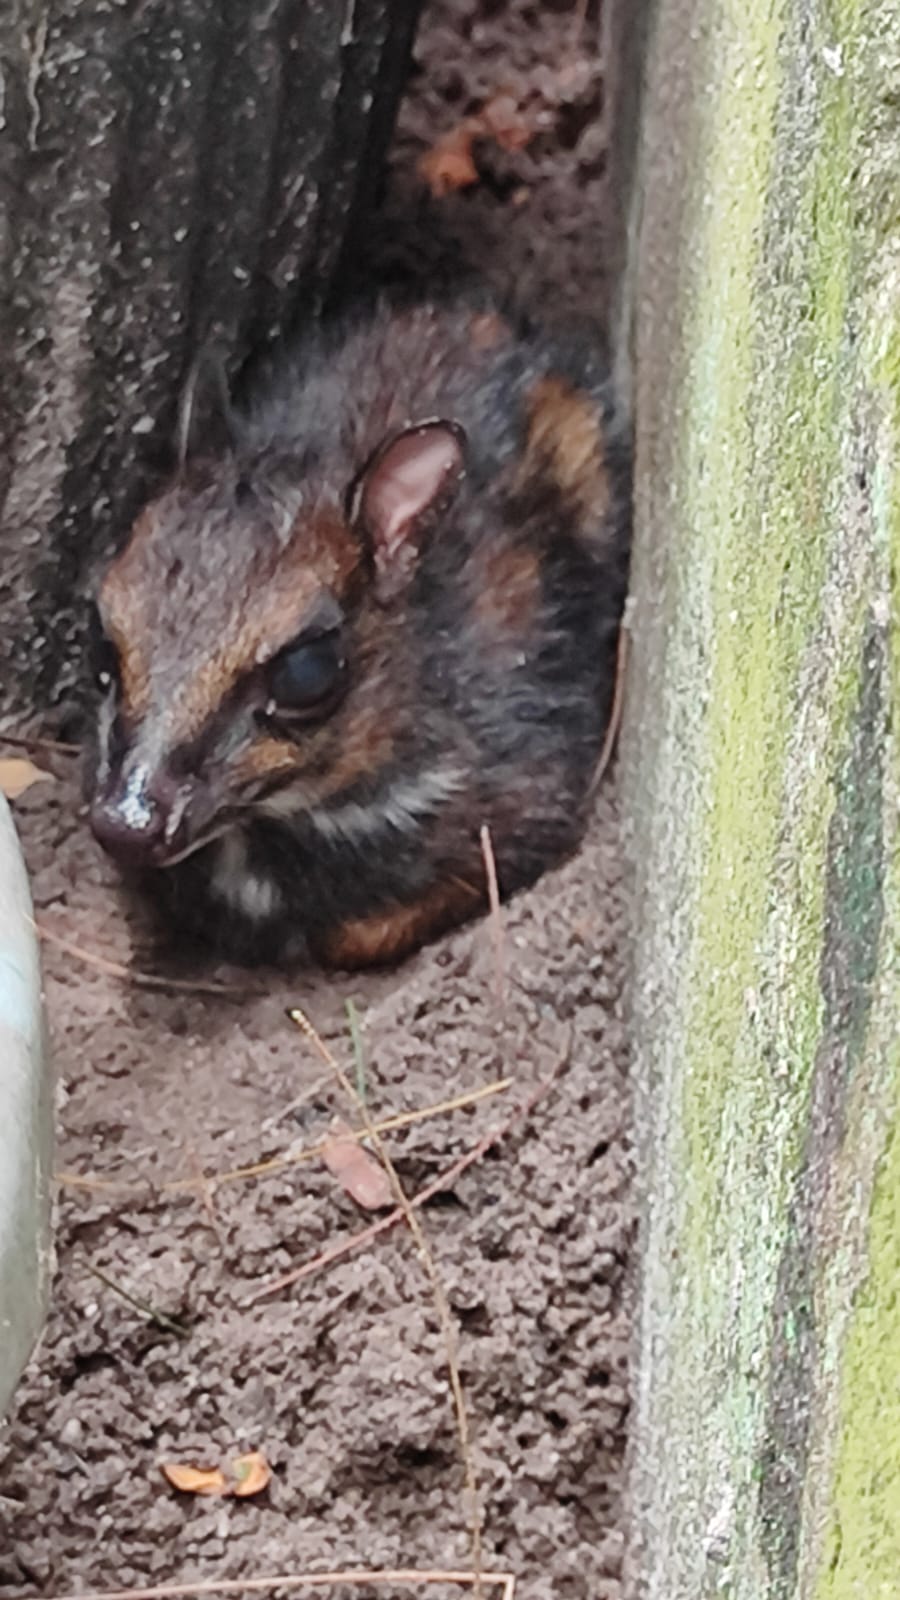 Read more about the article Newborn Uja Brings Hope for Endangered Bangka Mouse Deer Conservation